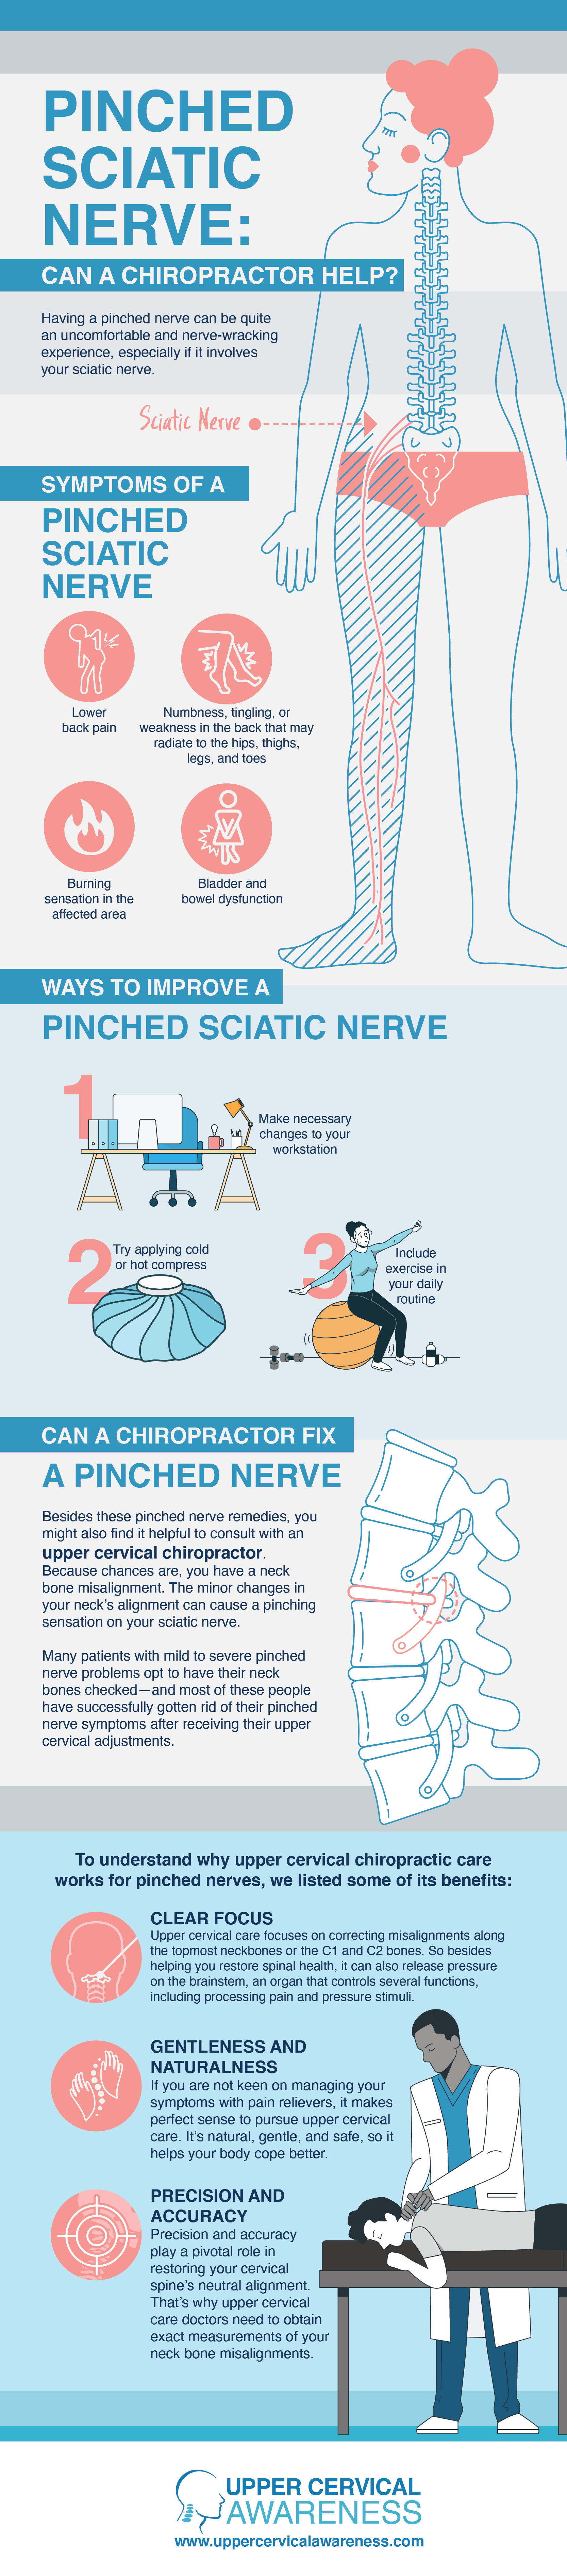 Can A Chiropractor Treat Pinched Nerves?